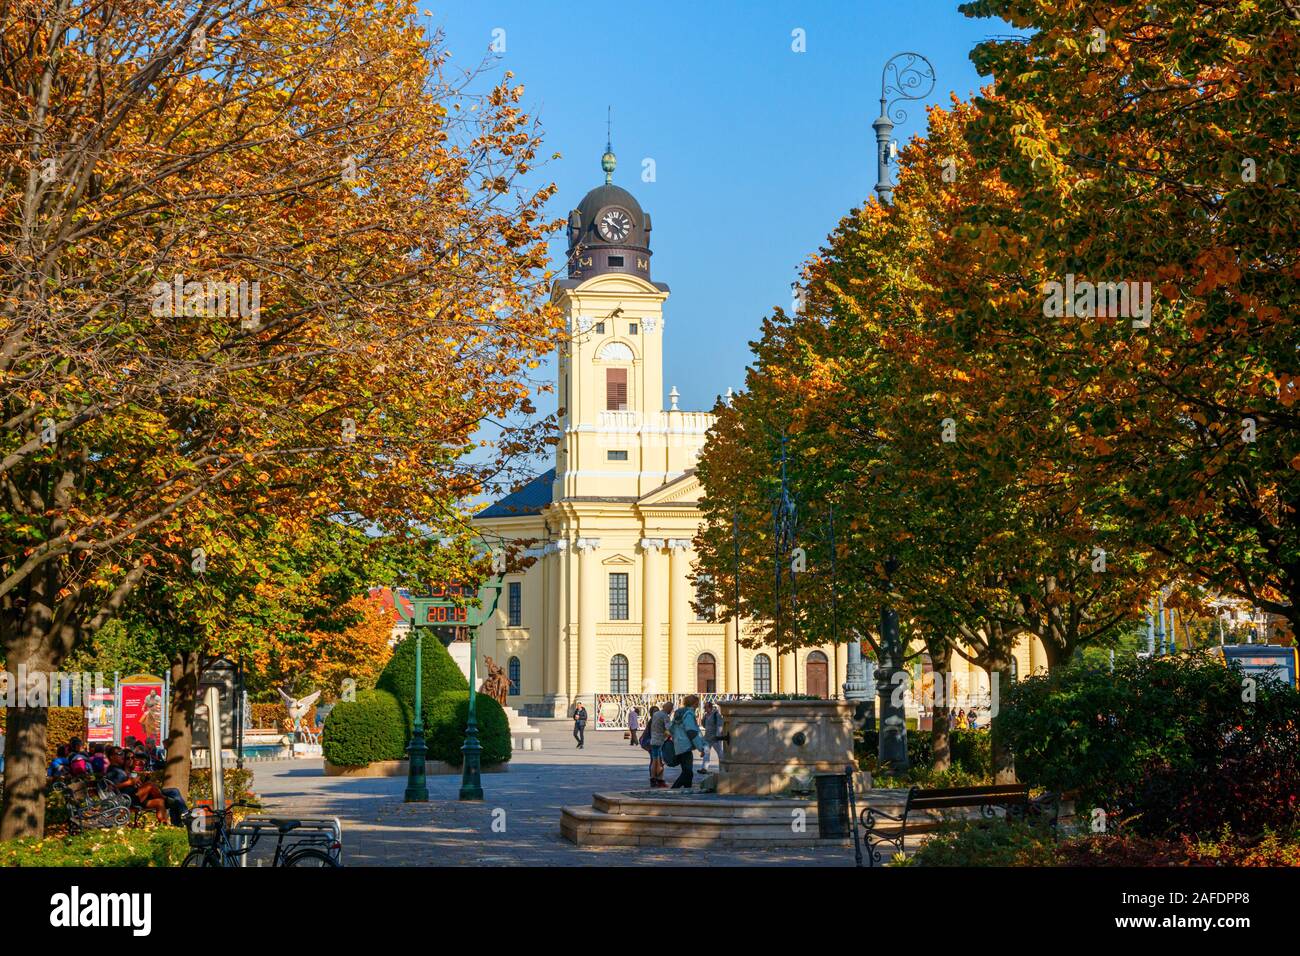 Great Reformed Church at the Kossuth Square with trees in autumn colours on a sunny day. Debrecen, Hungary. Stock Photo